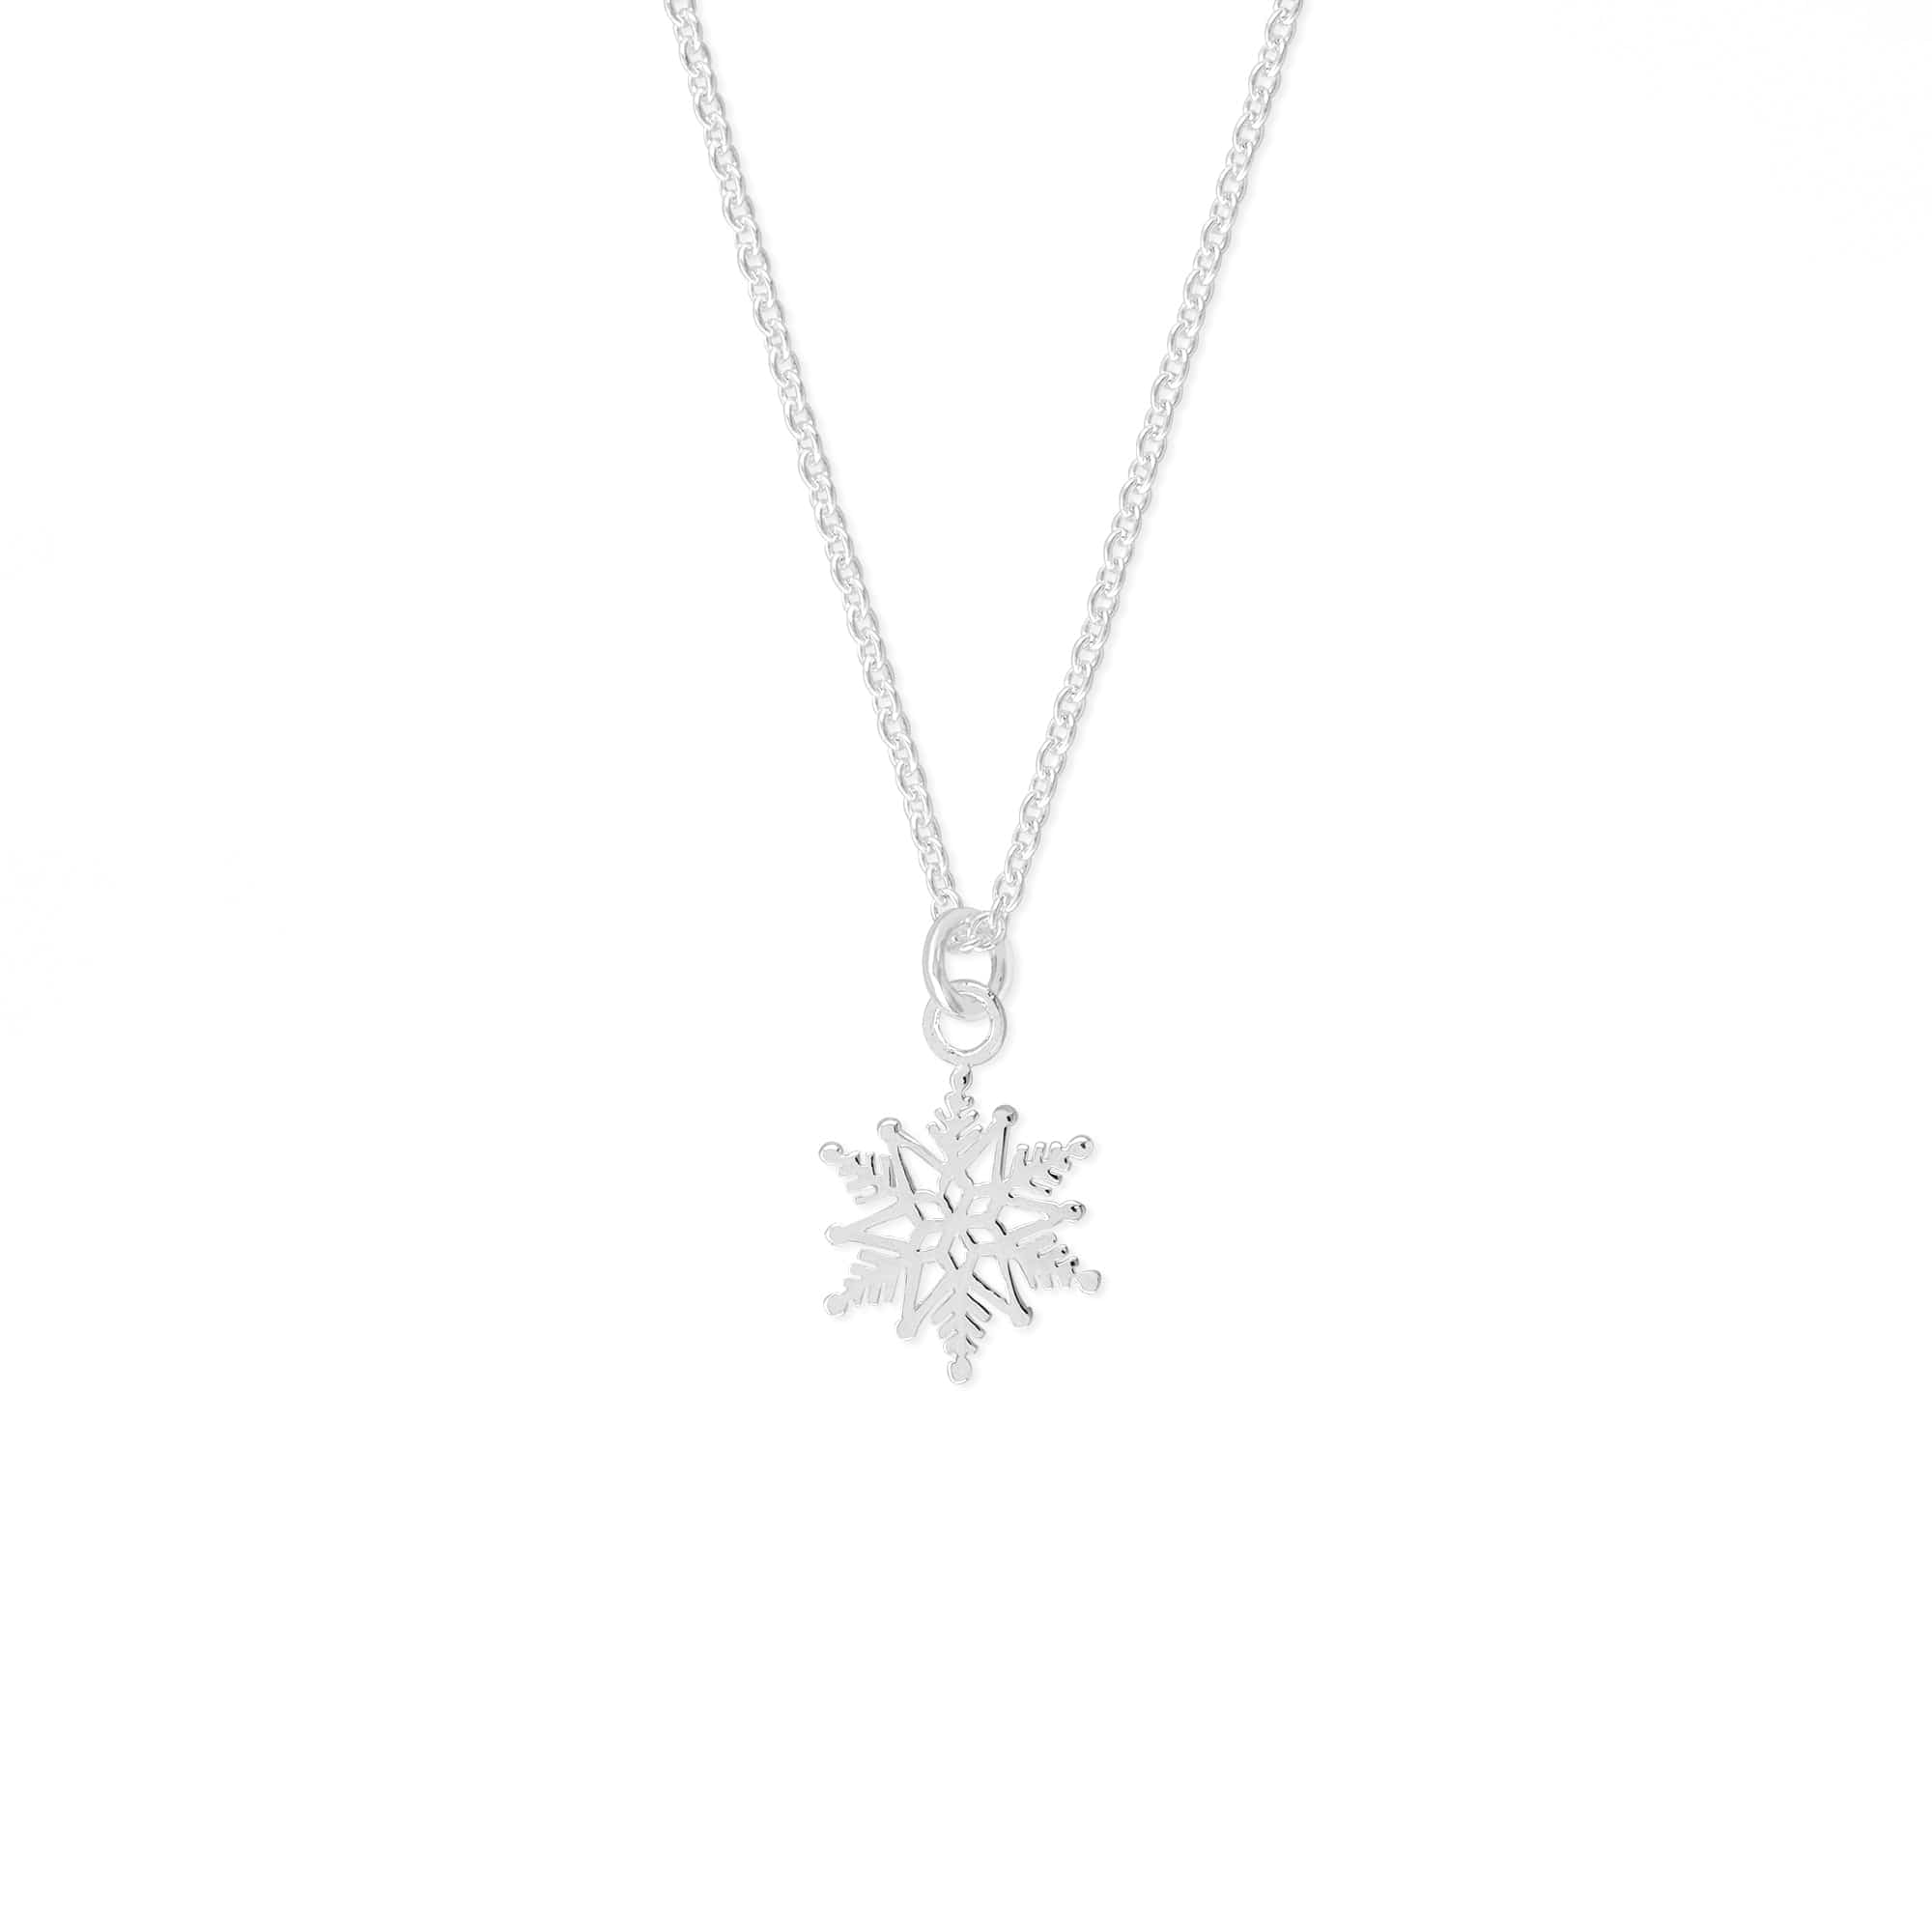 Boma Jewelry Necklaces Snowflake Necklace